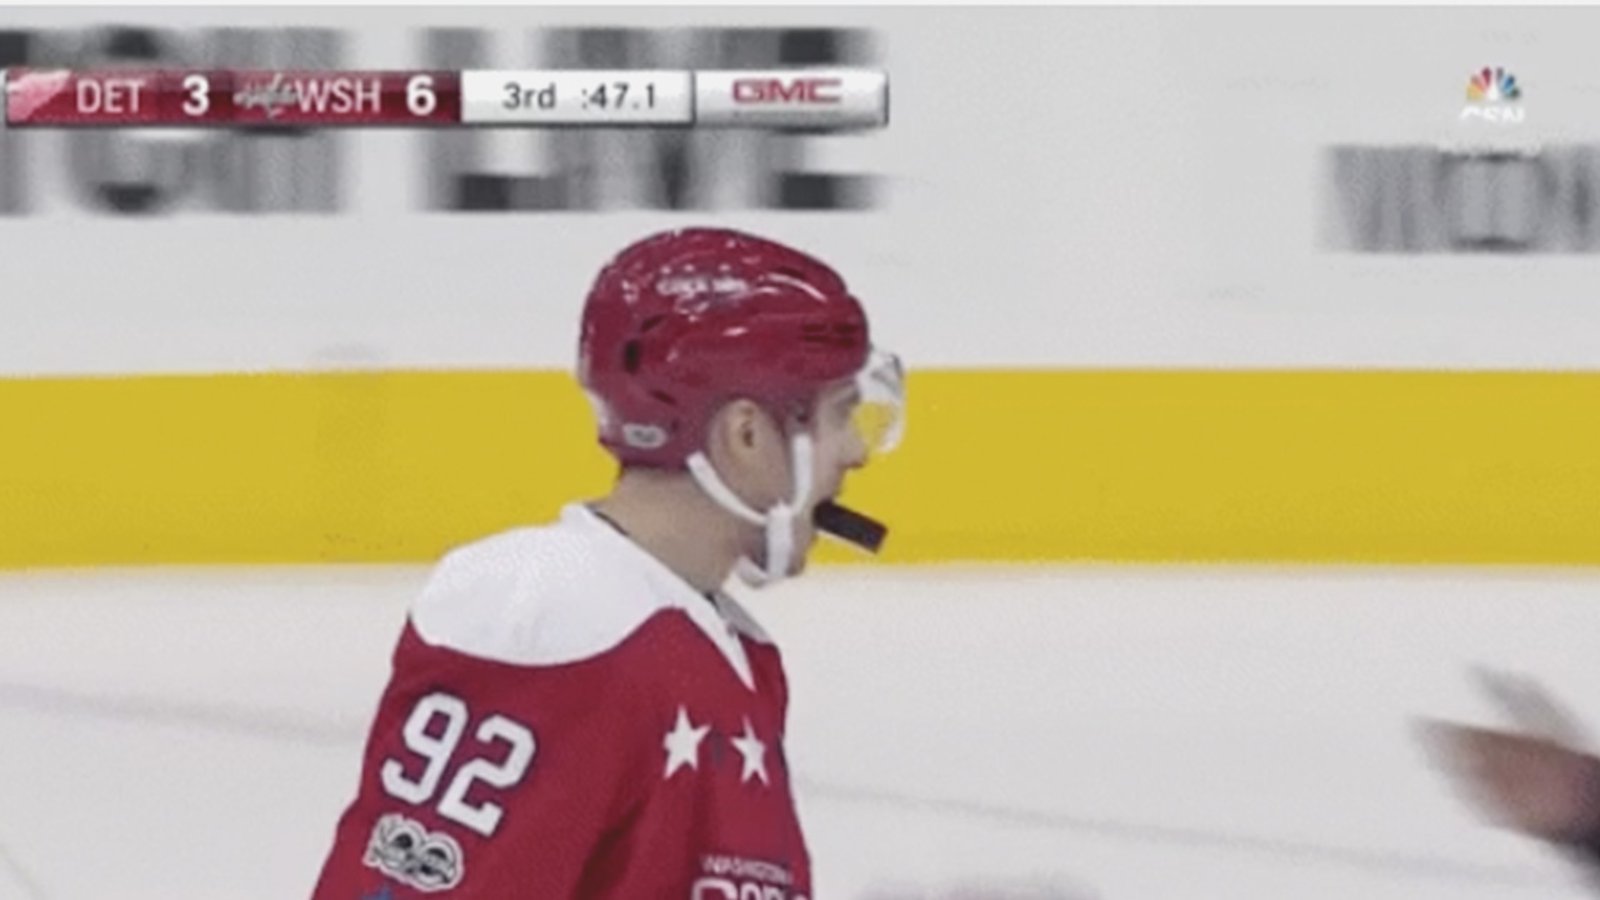 Must see : Evgeny Kuznetsov giving the puck to the ref with his mouth.